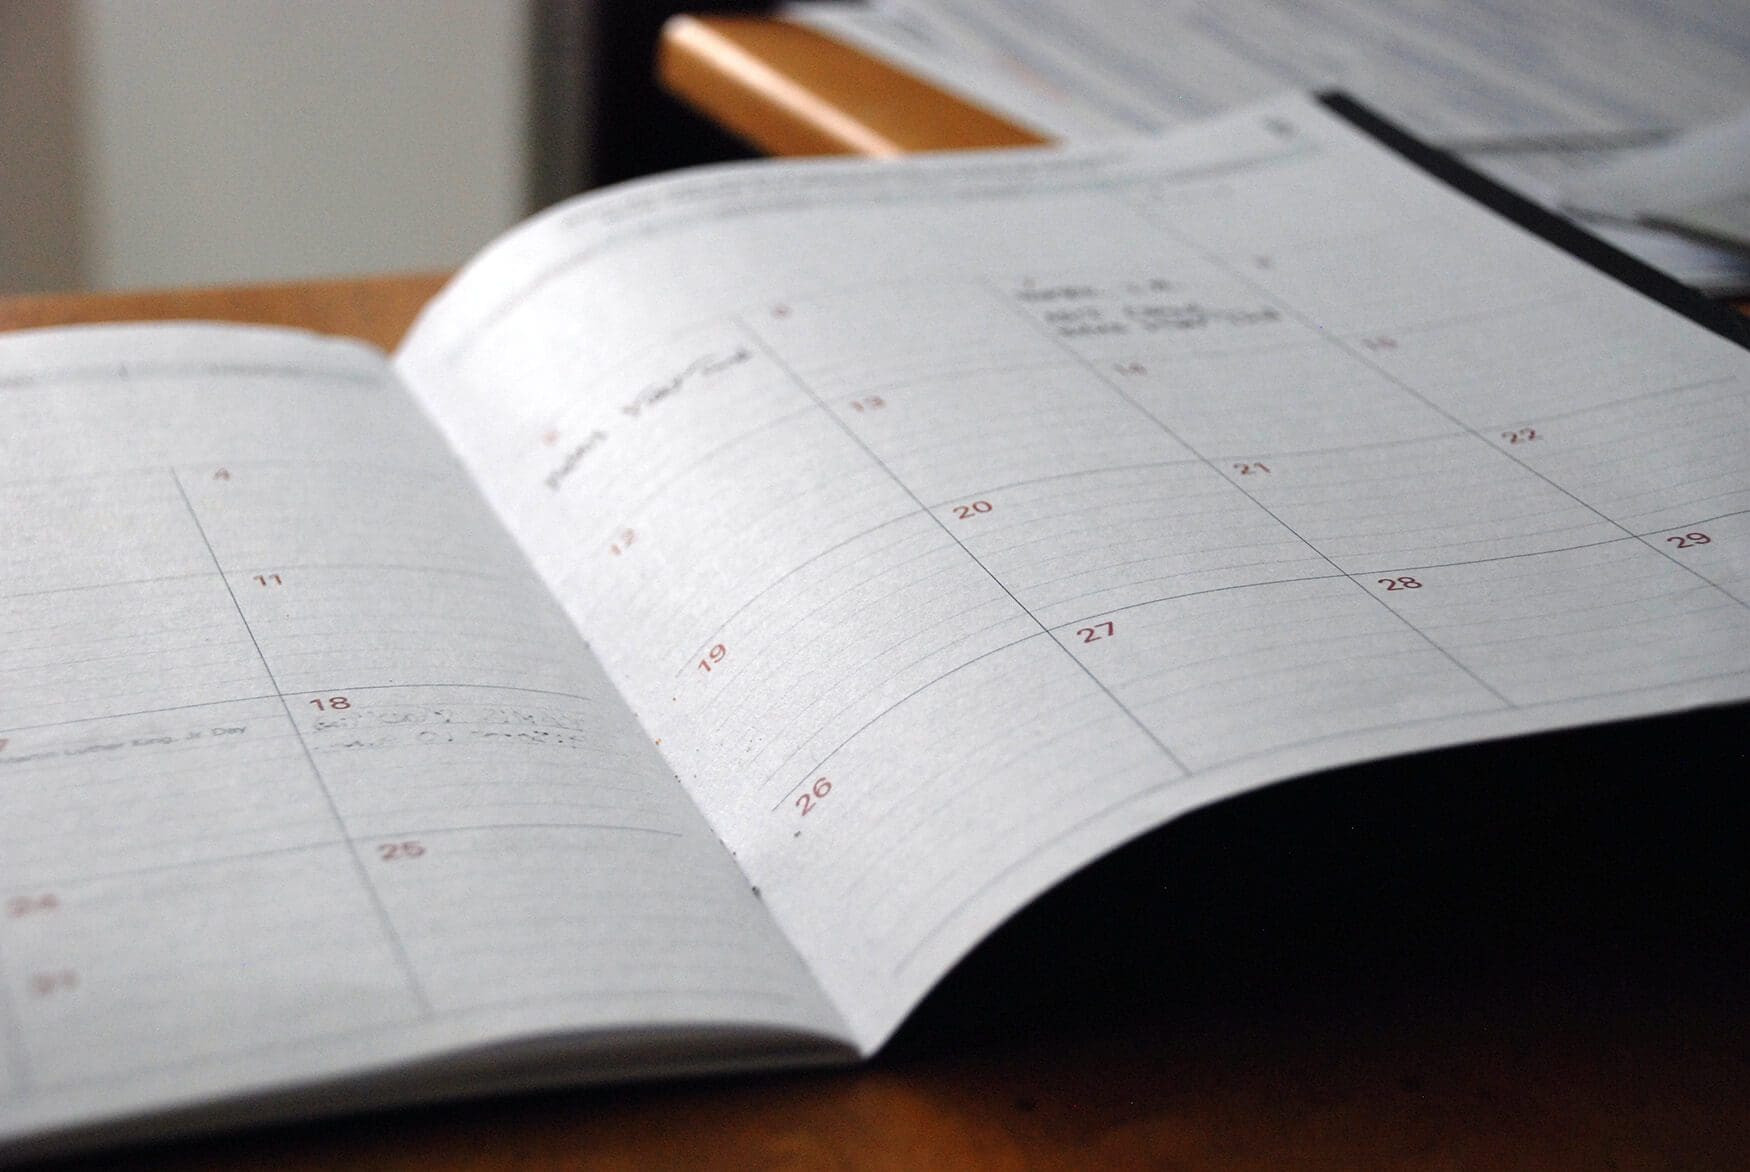 Quick Strategies to Improve Your Time Management Skills